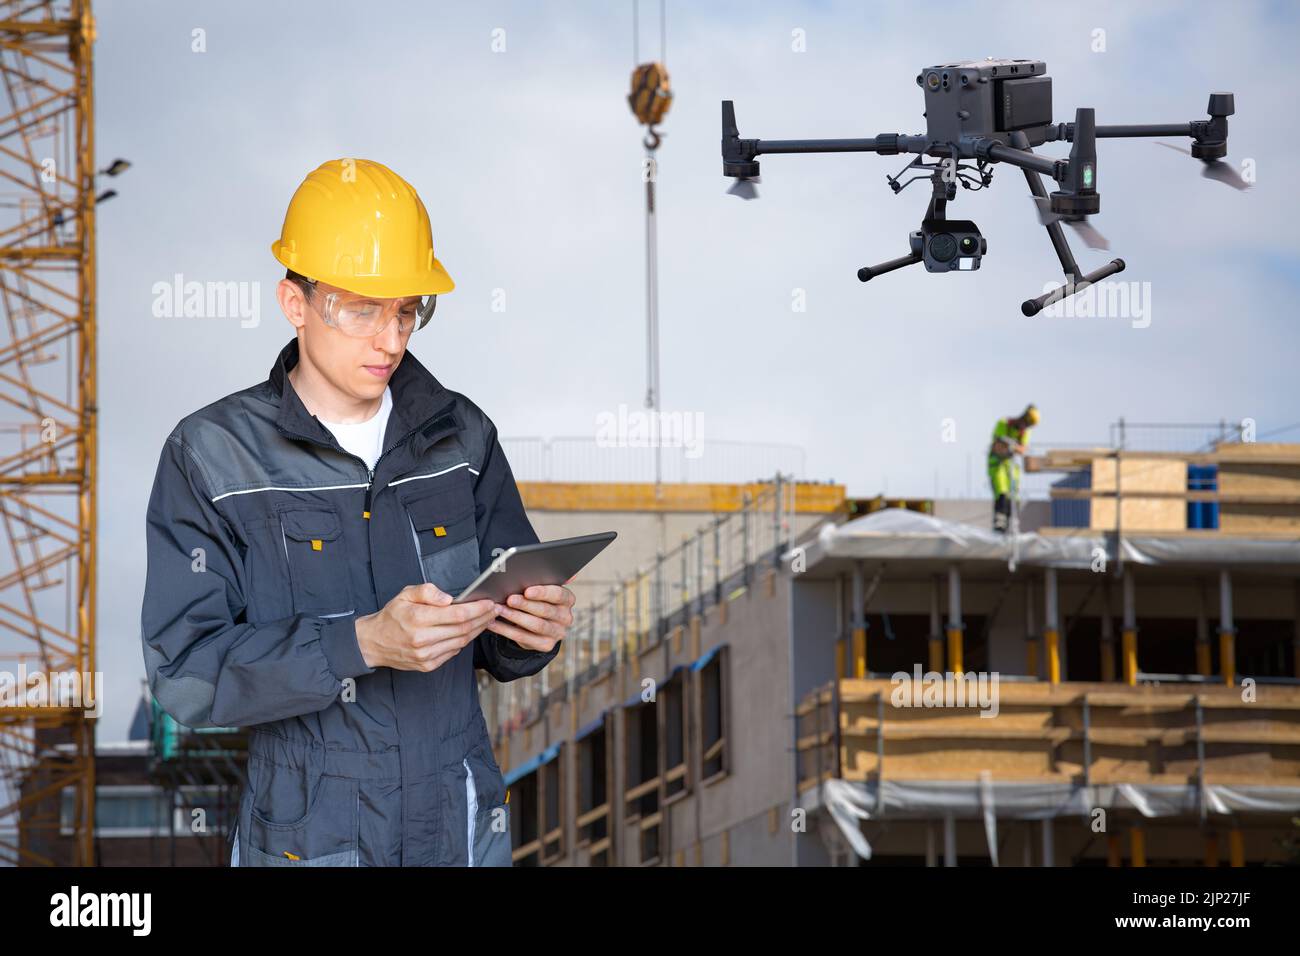 Engineer with digital tablet controls drone on a construction site Stock Photo